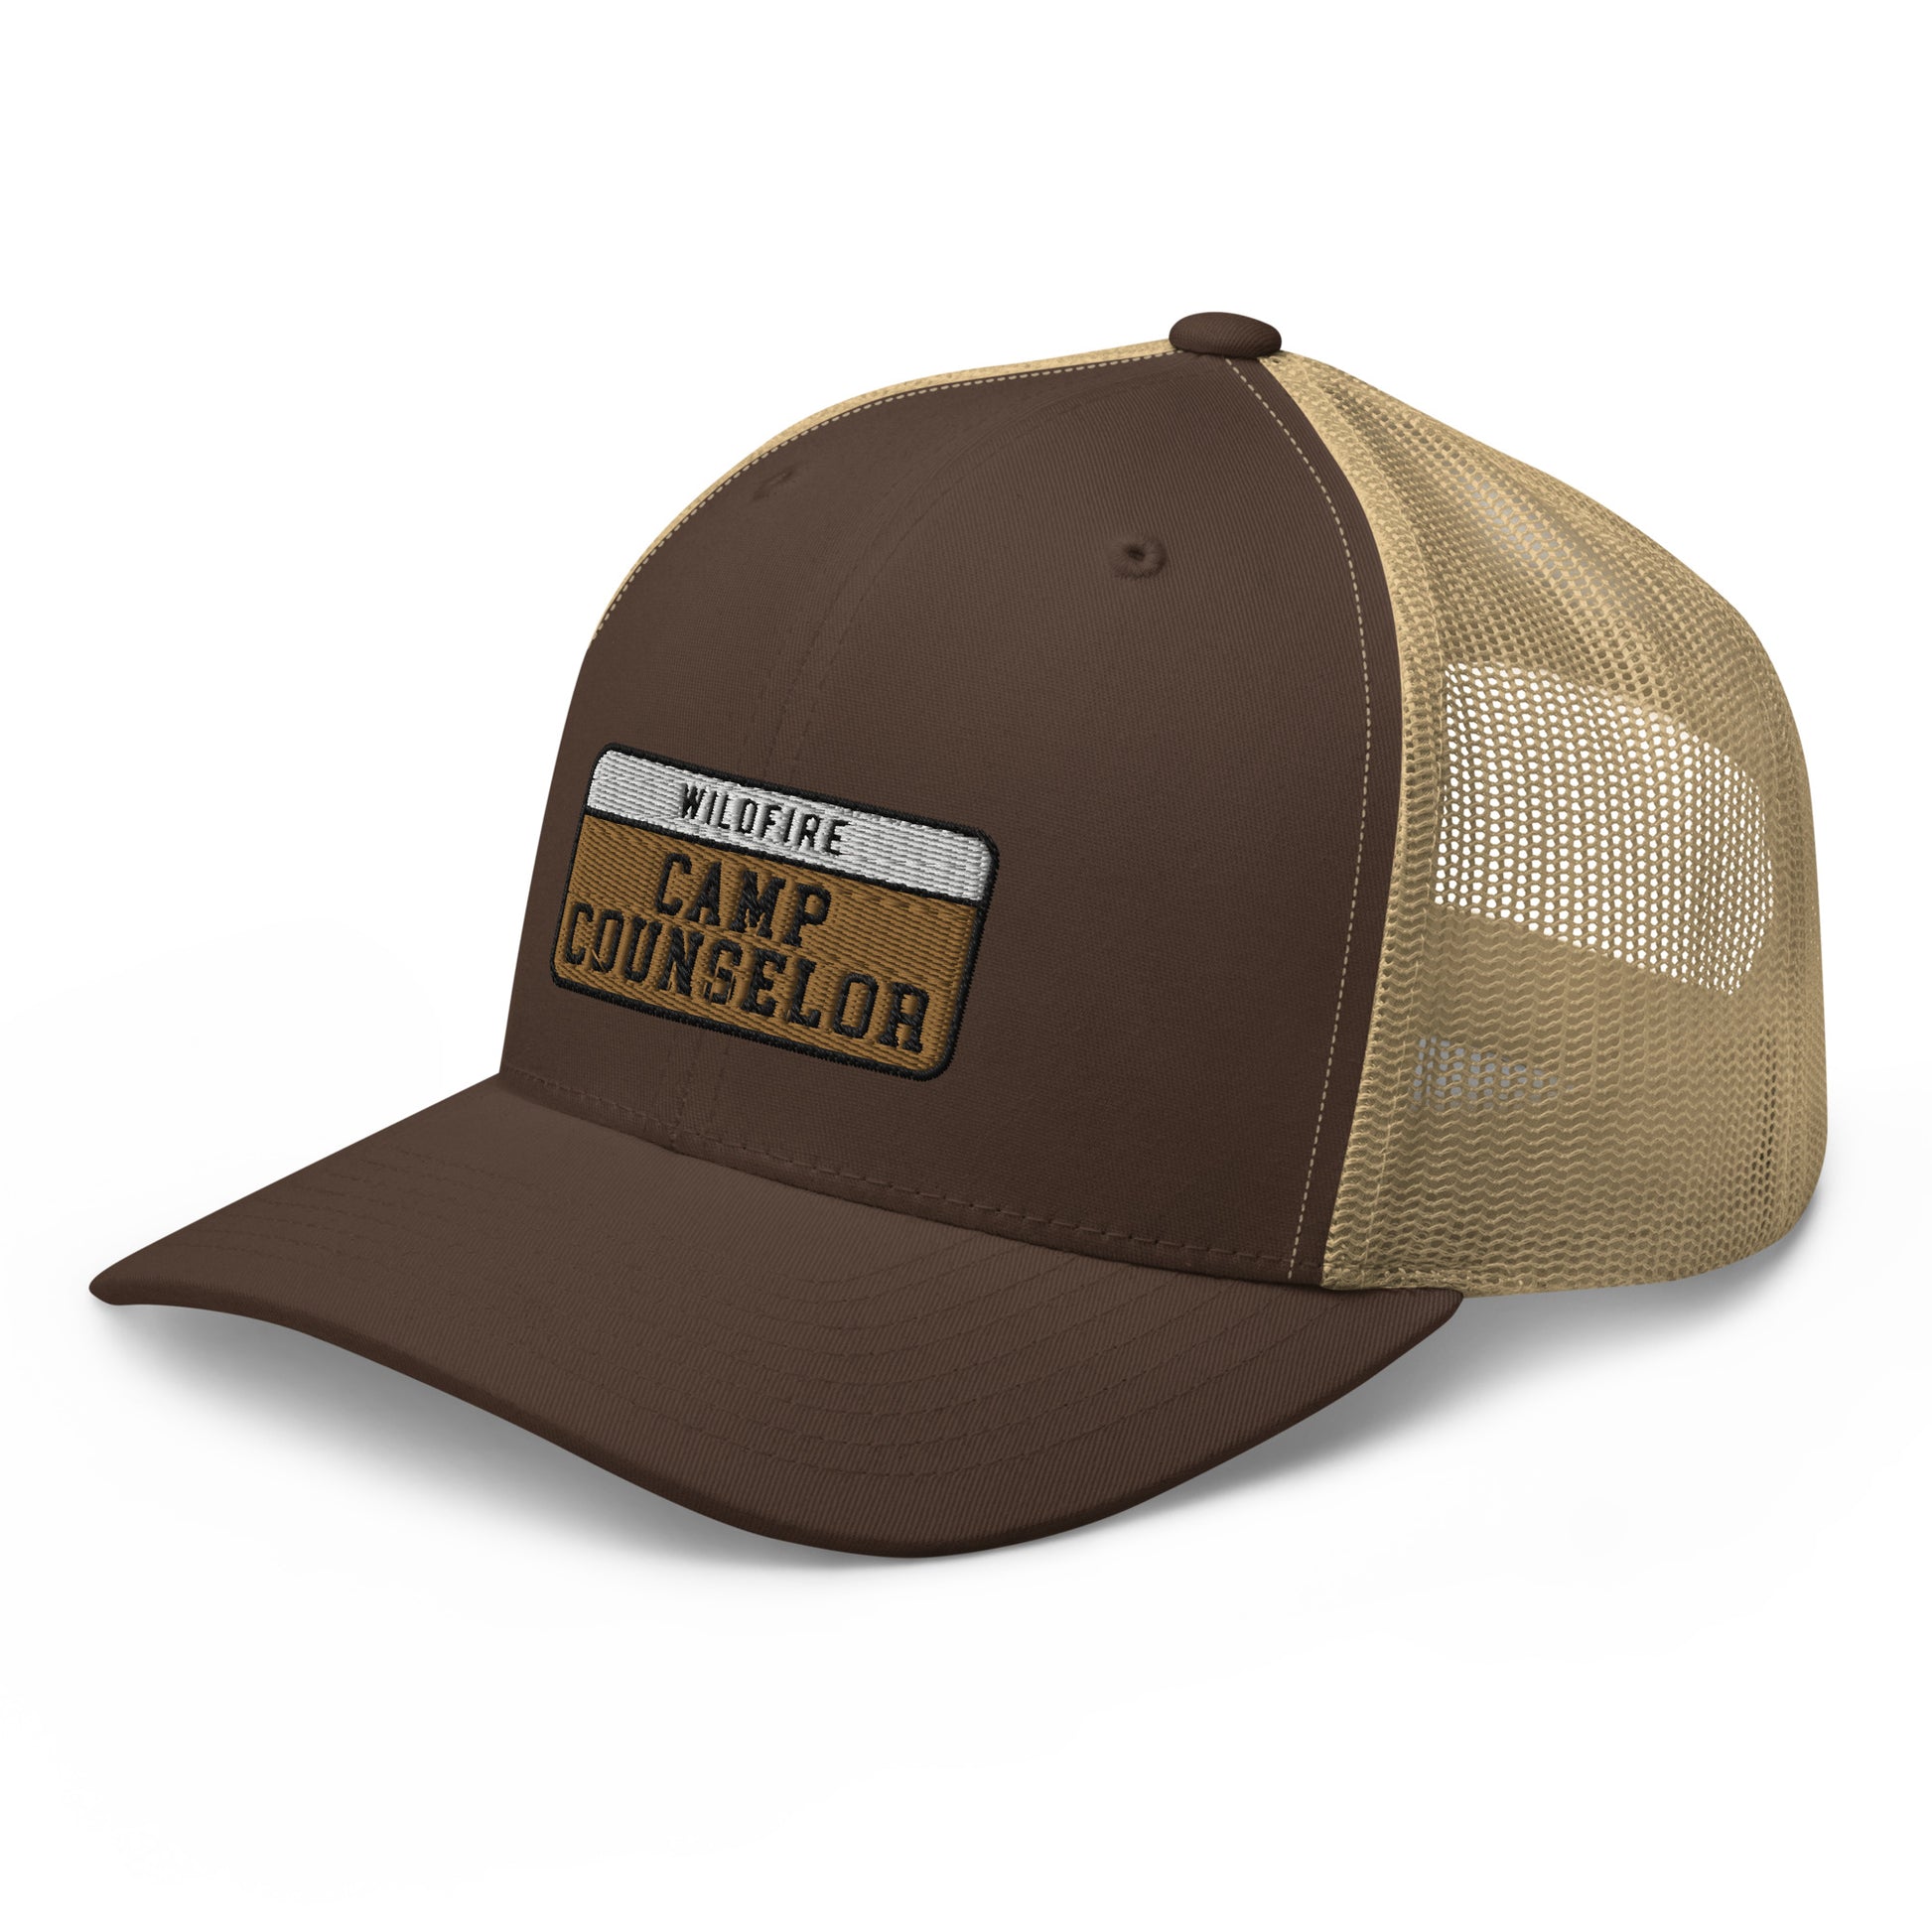 Wildfire Cigars embroidered Camp Counselor retro trucker in brown and khaki facing the front left